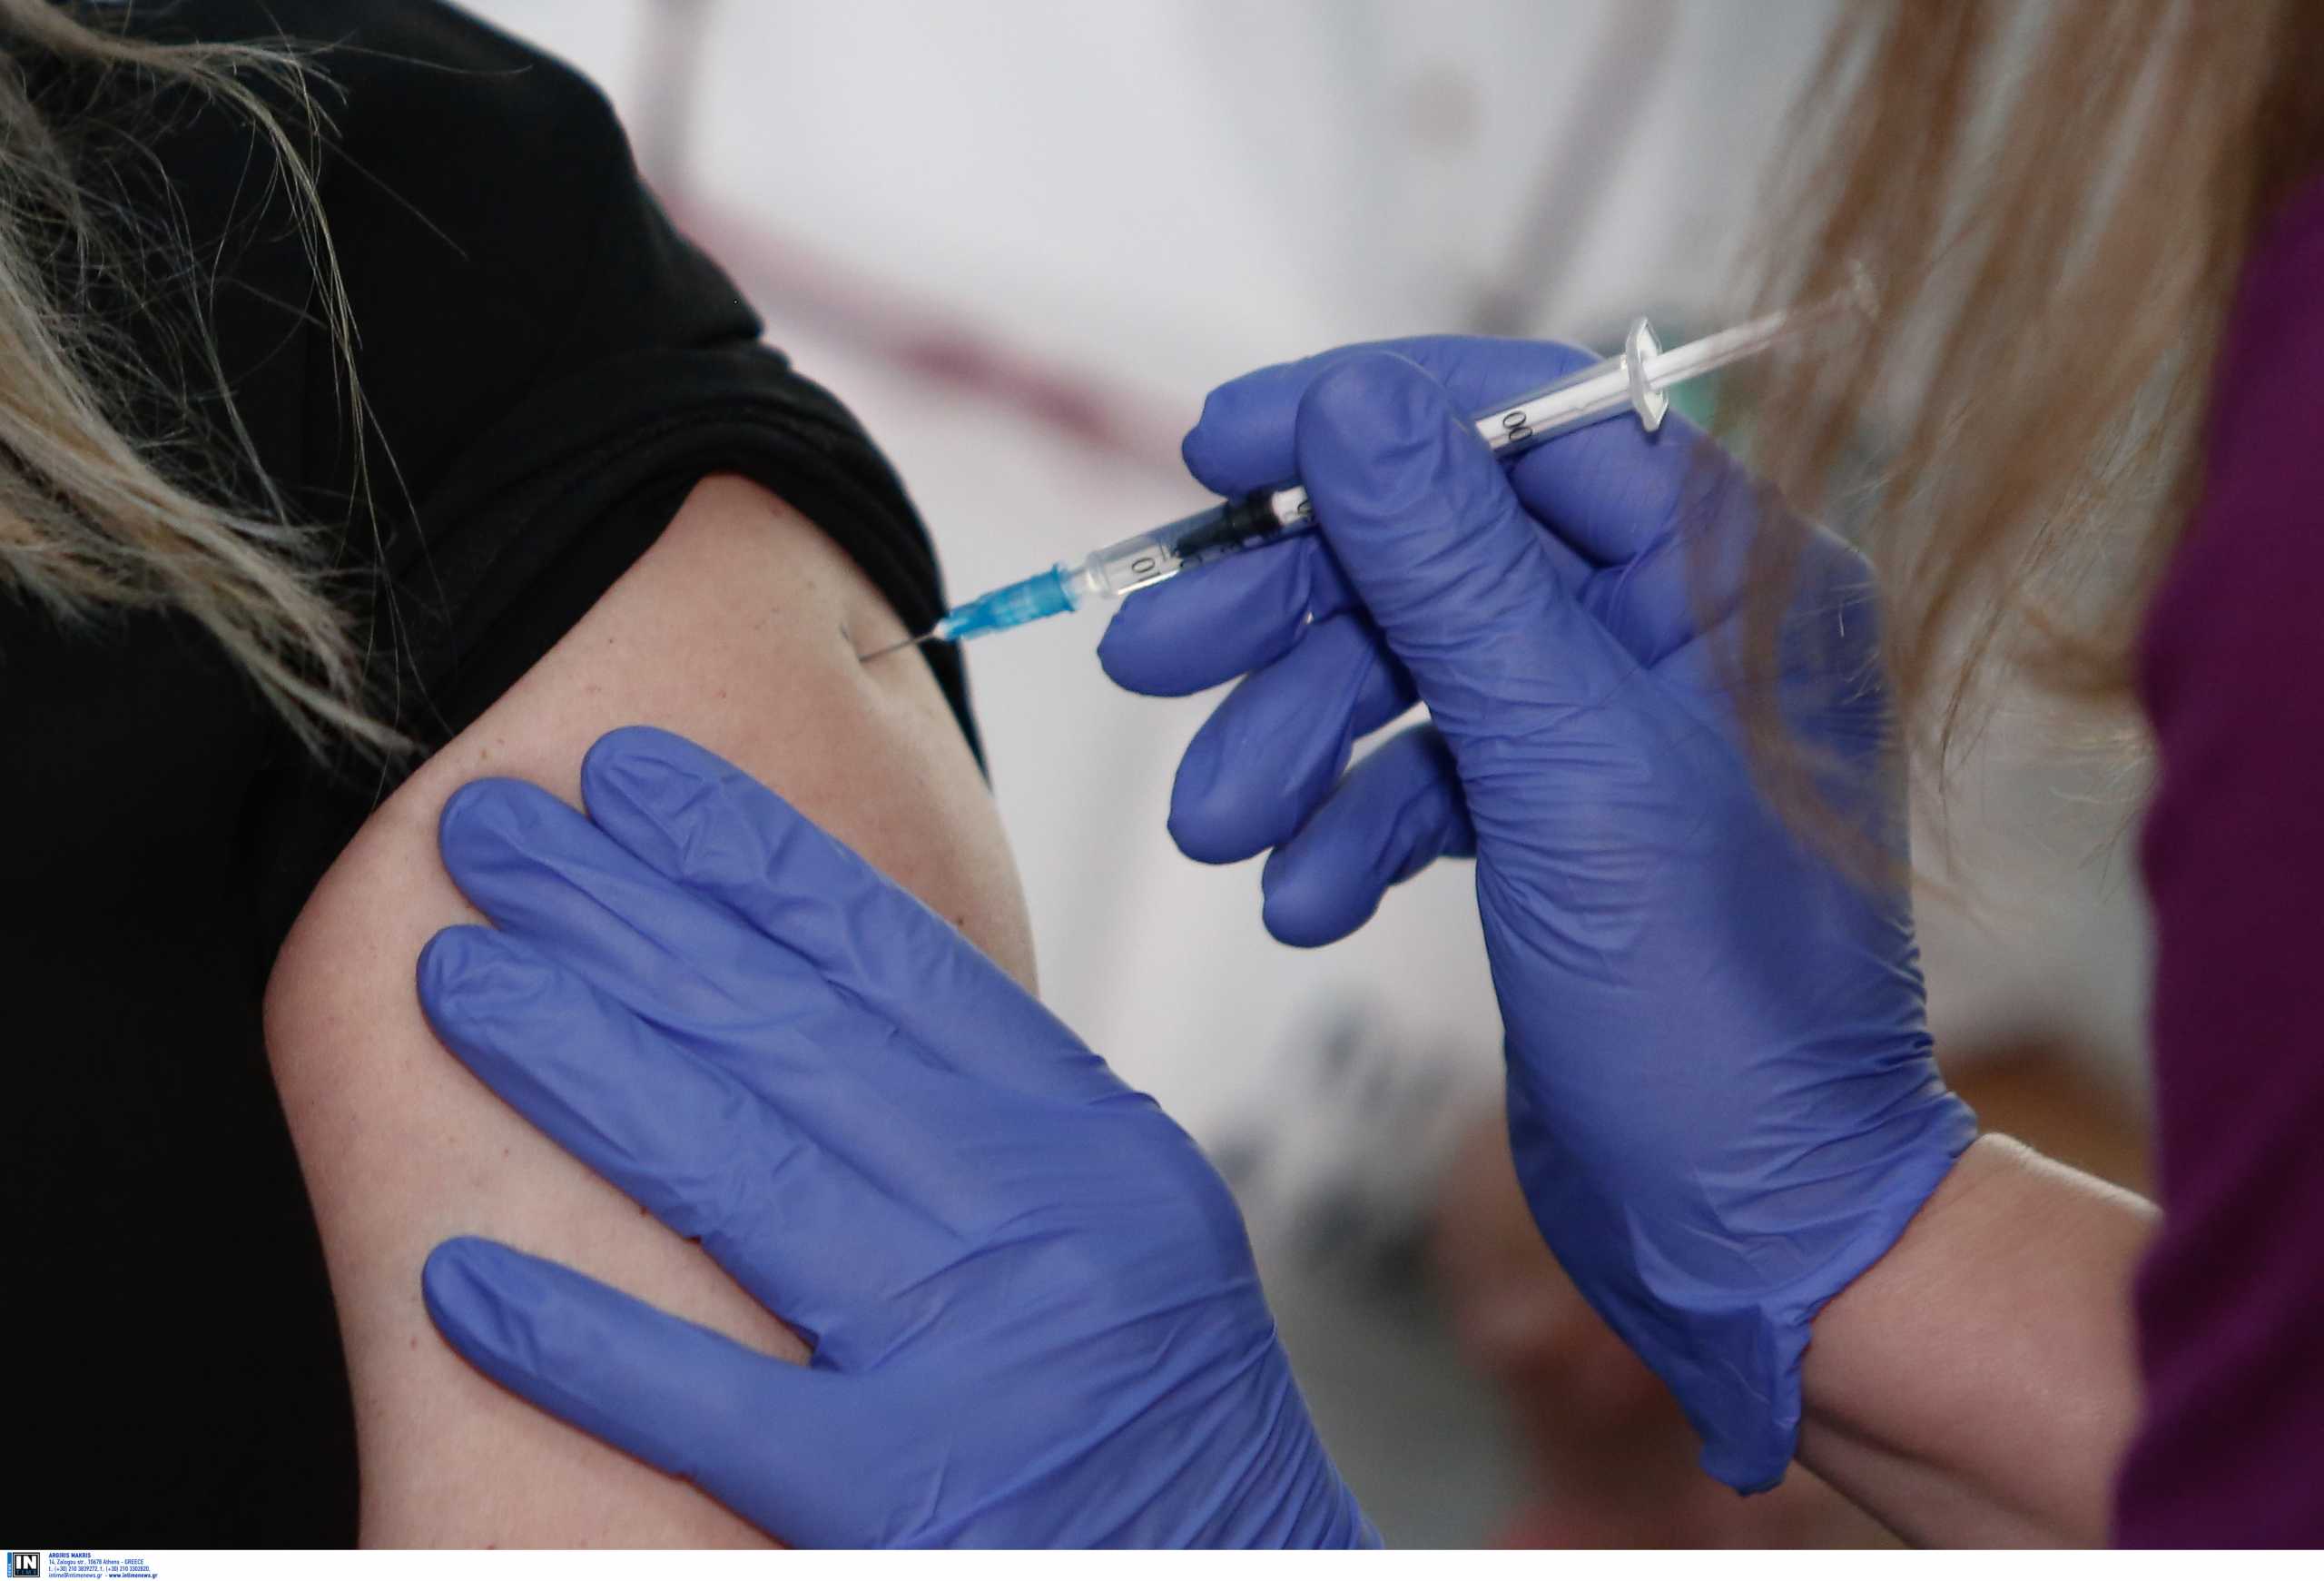 Mandatory vaccinations for professional groups to be announced in Greece